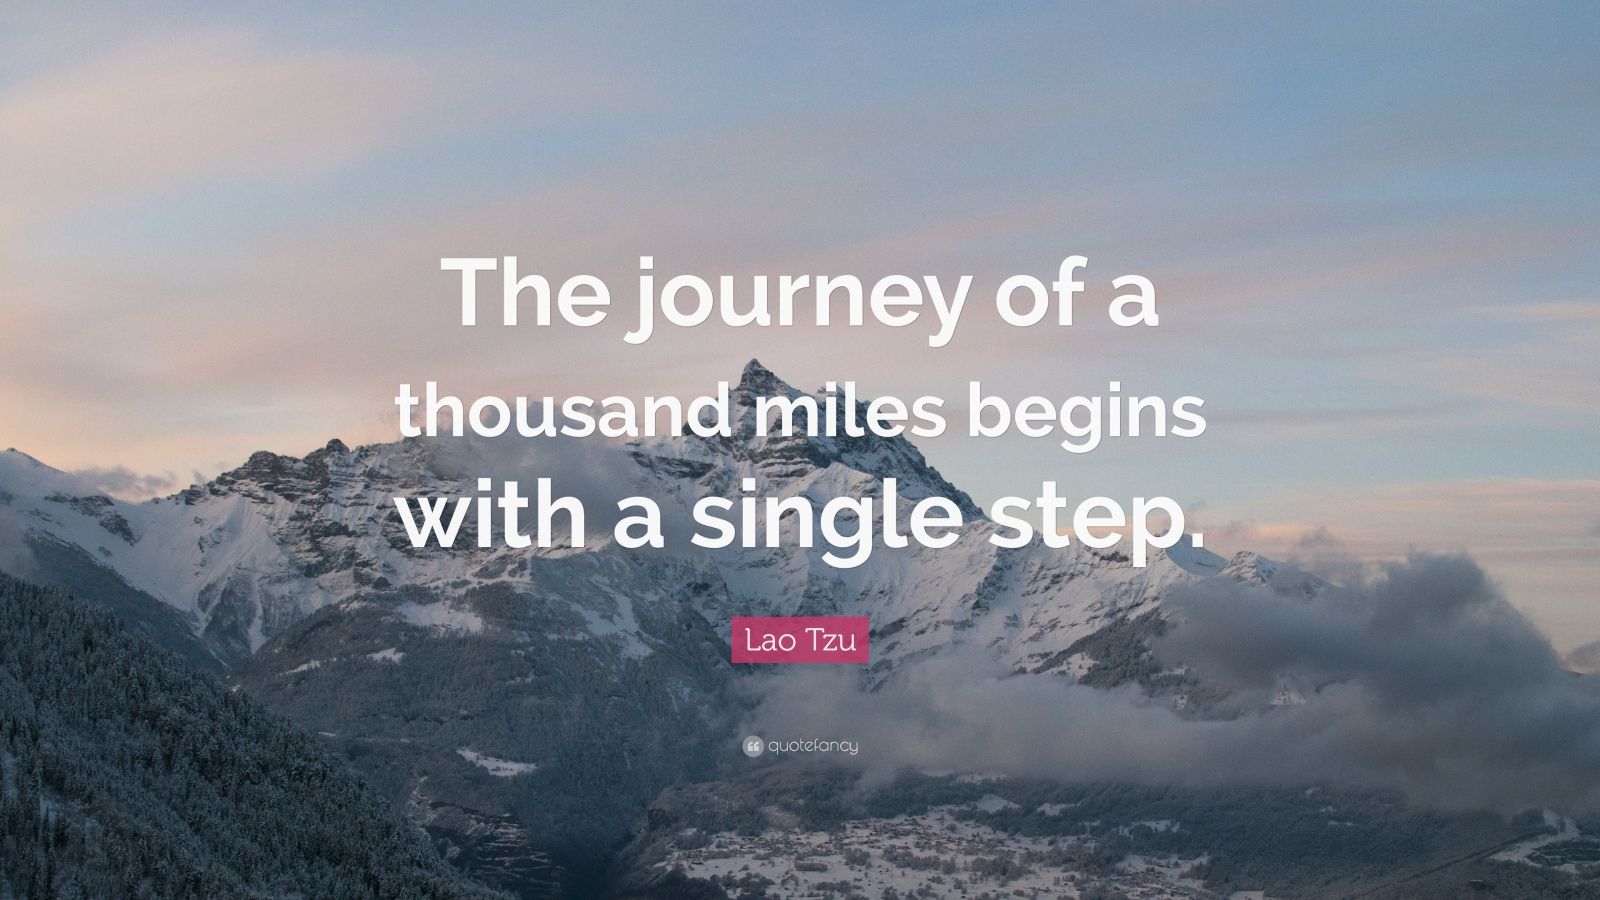 23443 Lao Tzu Quote The journey of a thousand miles begins with a single